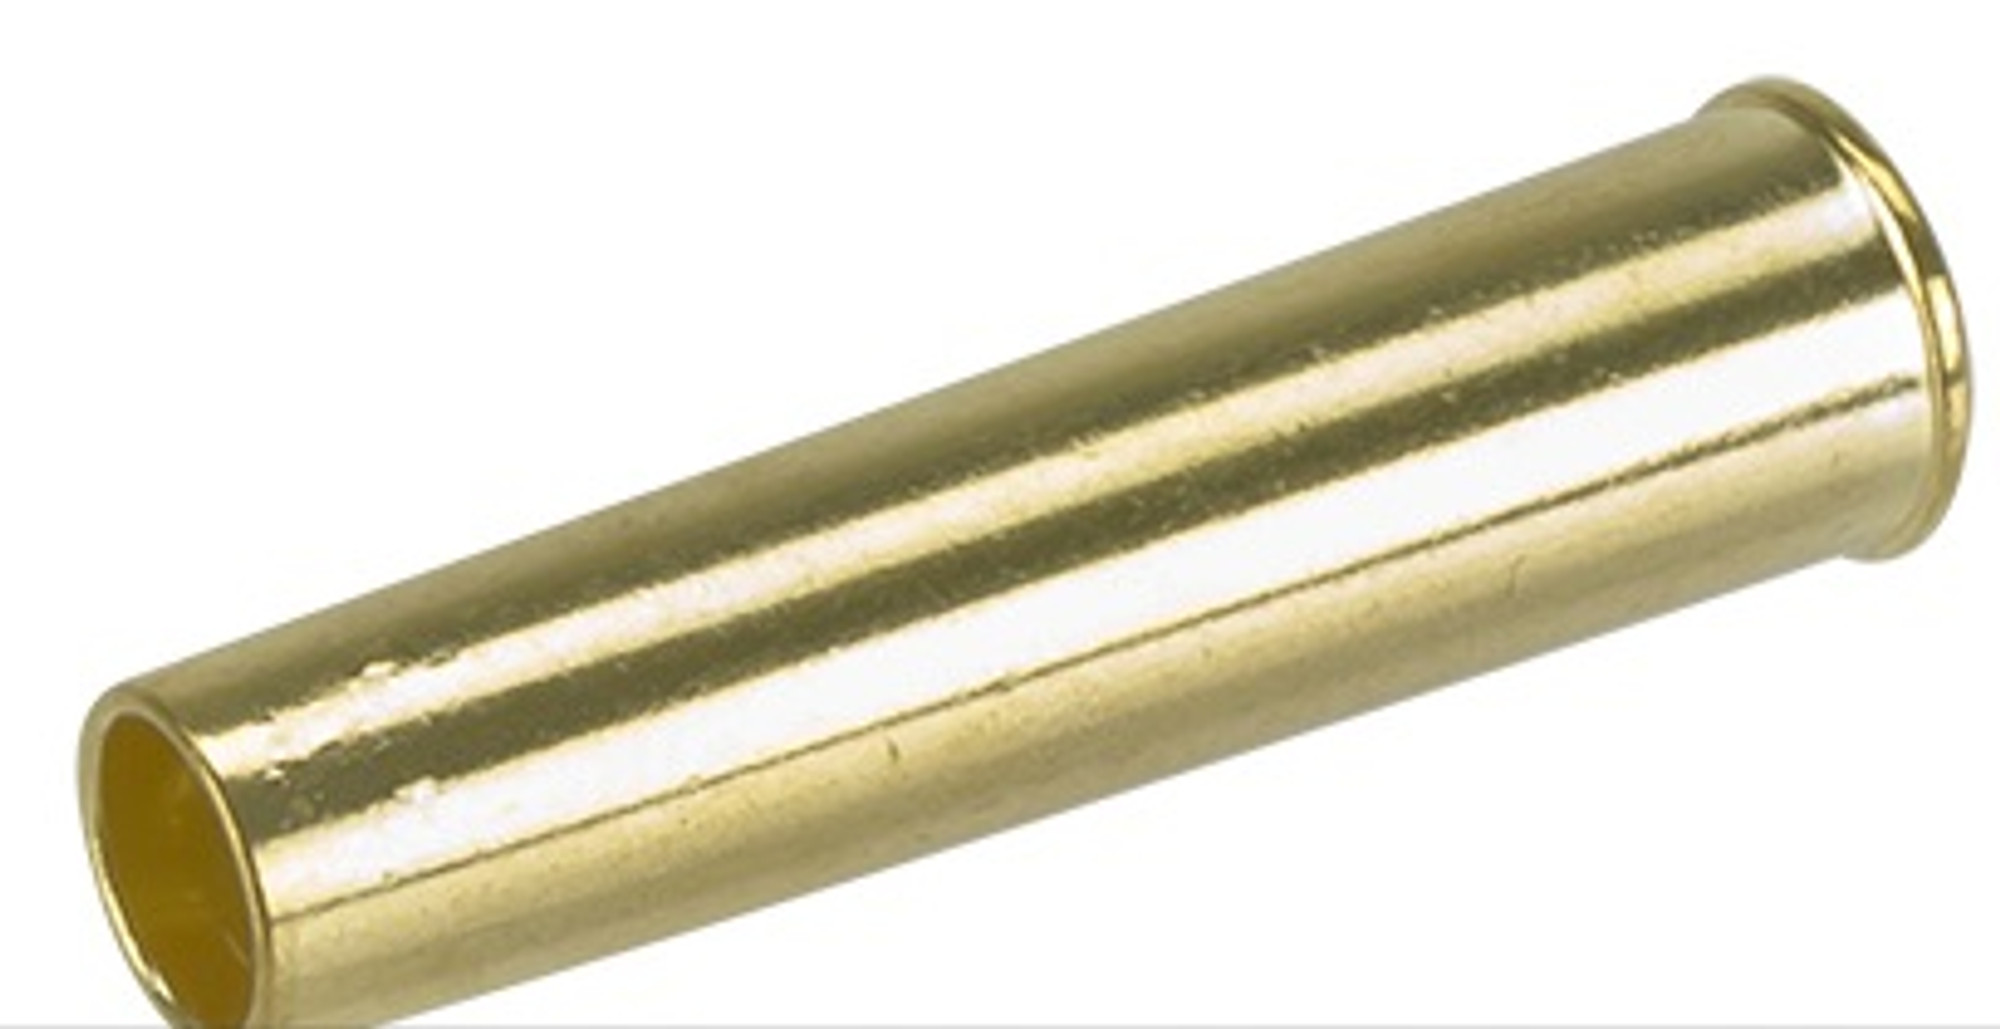 Spare Brass Shells for Nagant Series Airsoft Co2 Revolvers - Set of 7